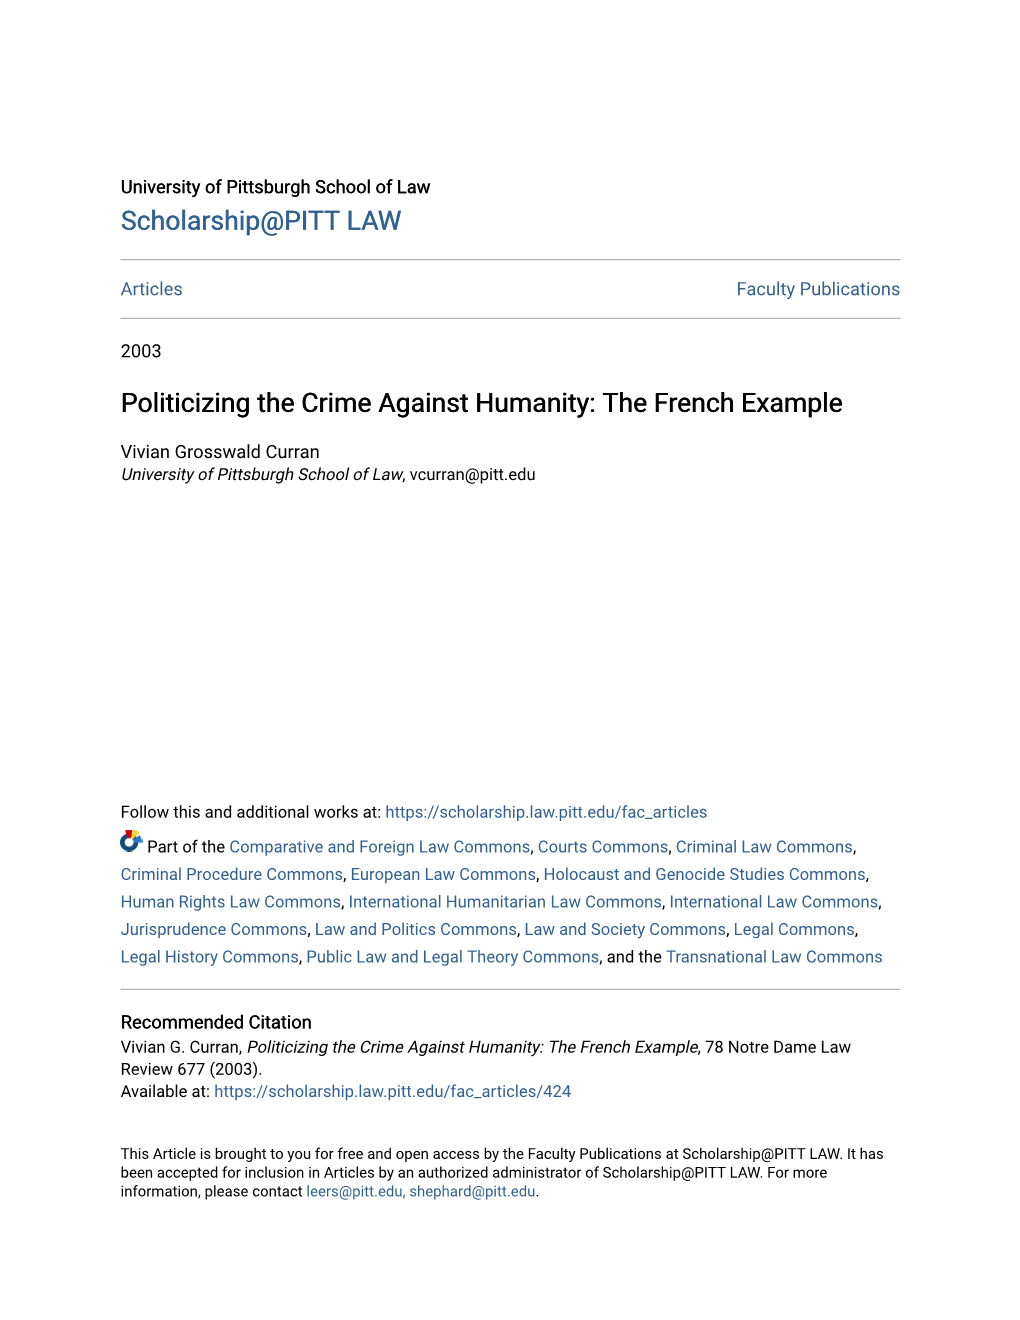 Politicizing the Crime Against Humanity: the French Example